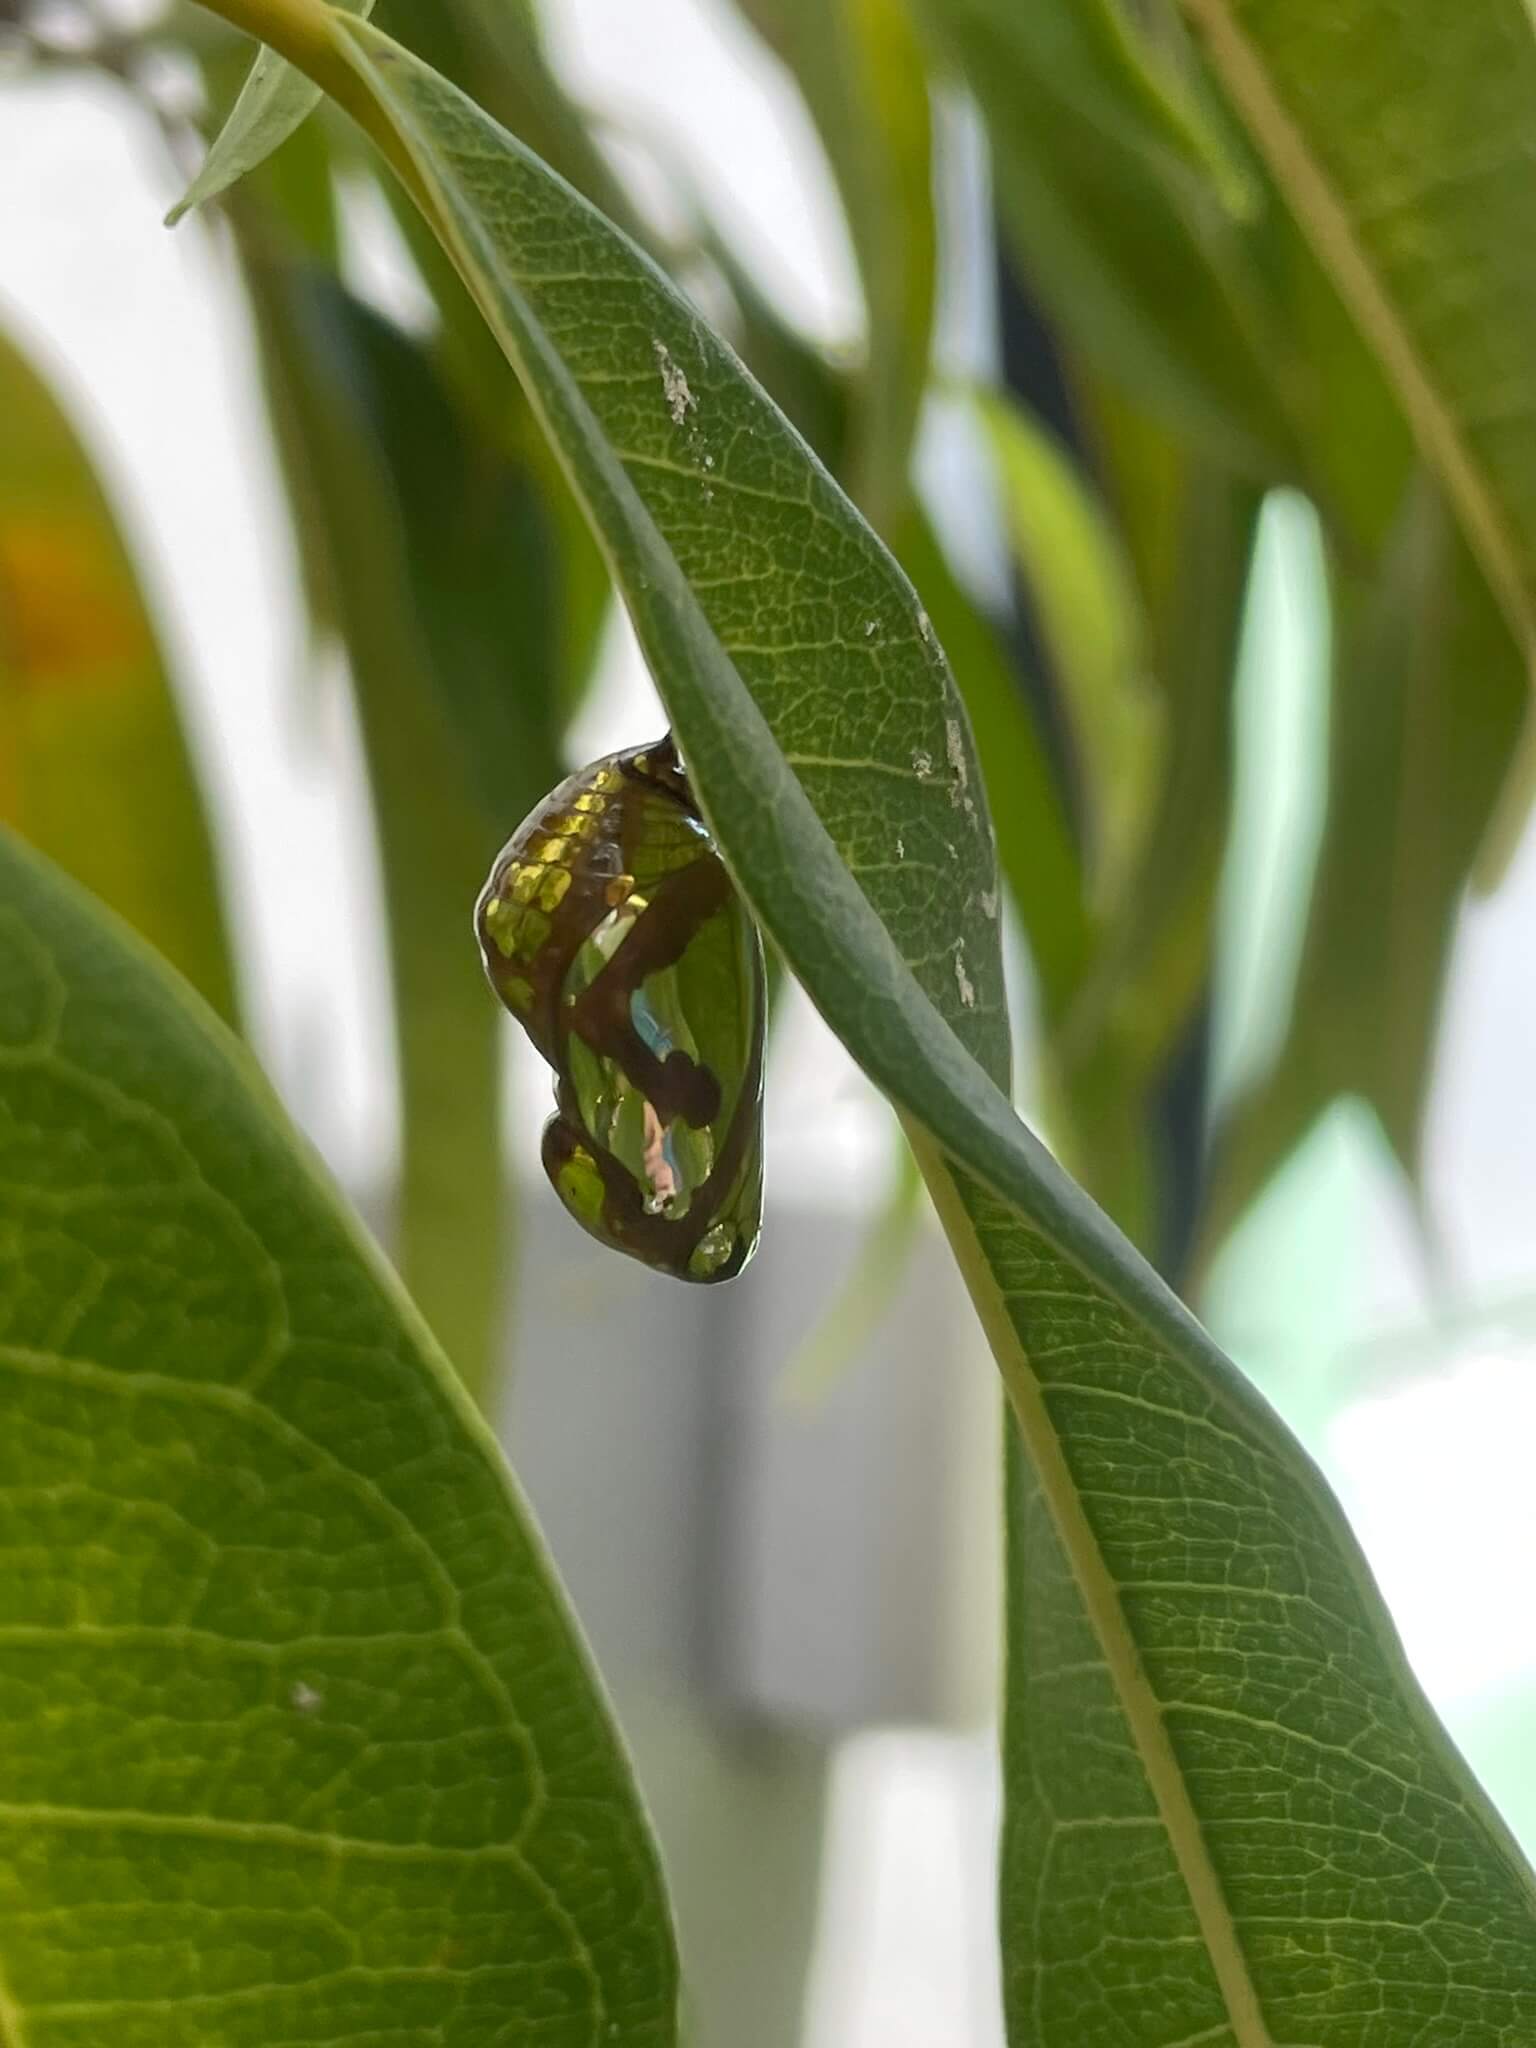 a photo of a common crow butterfly chrysalis hanging from a leaf